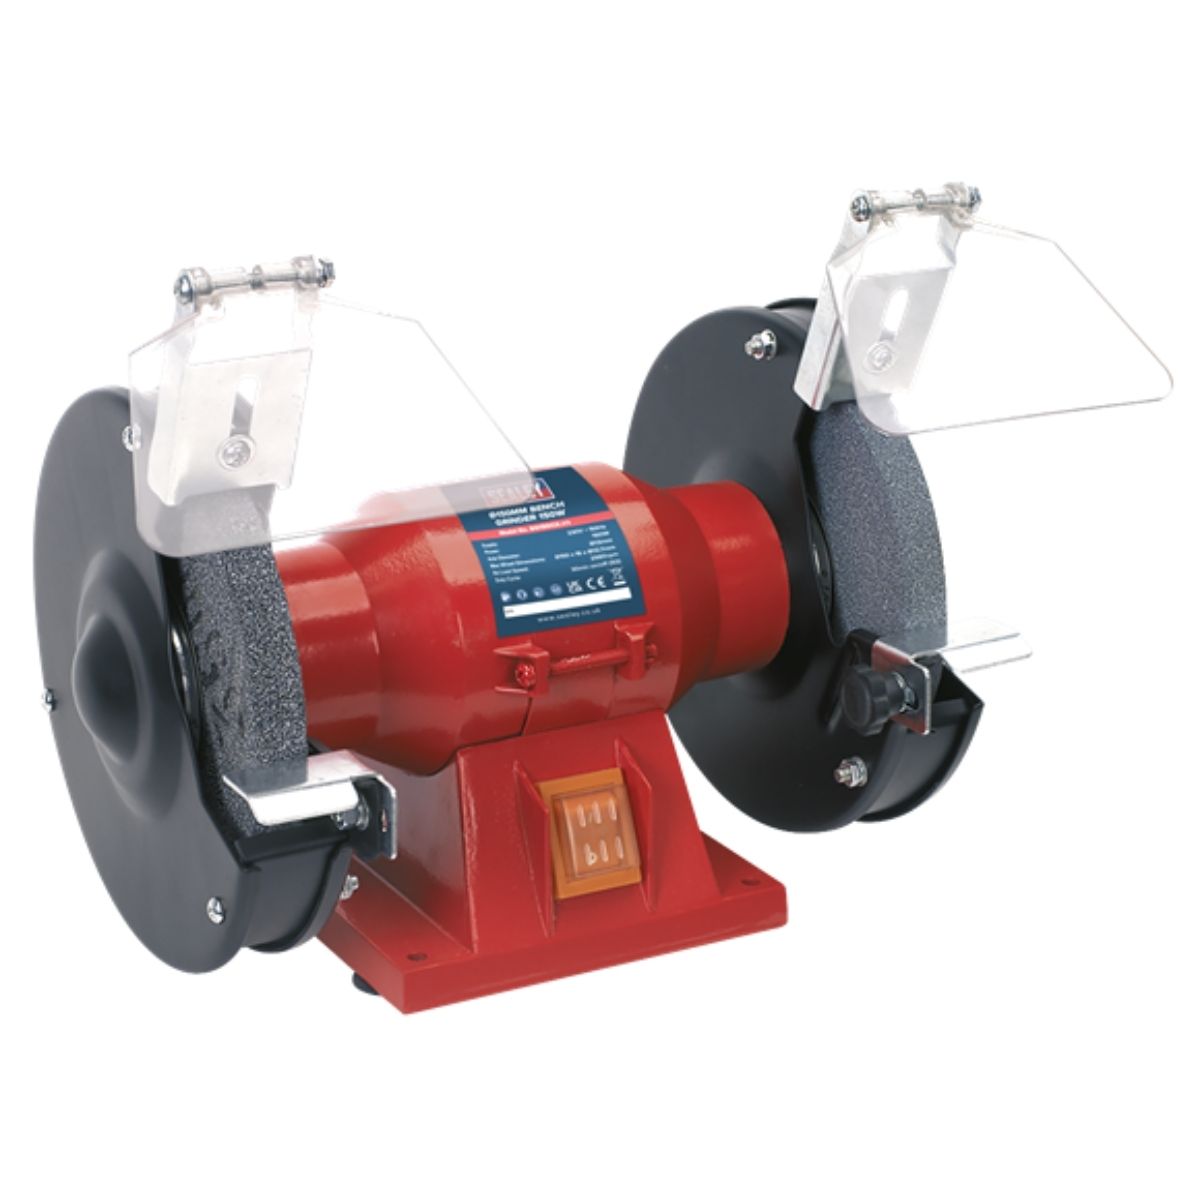 Sealey BGVDSCOMBO3 Bench Grinder Stand Deal